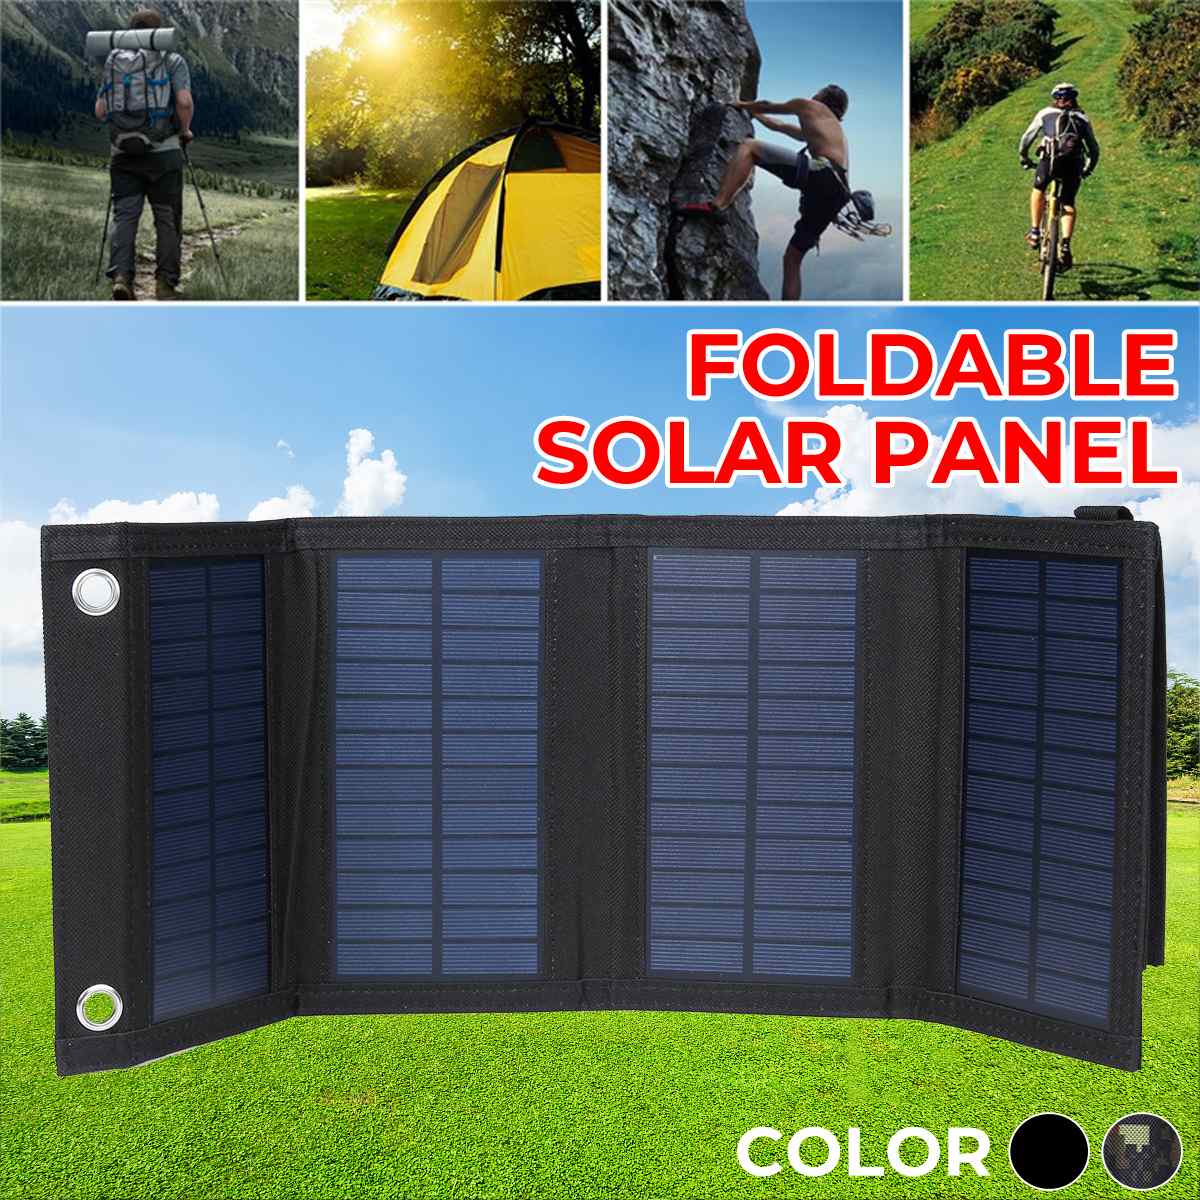 Portable 50W 5V Solar Panel Phone Charger USB Folding Solar Panels for Traval Outdoor Solar Battery Board for cellphone